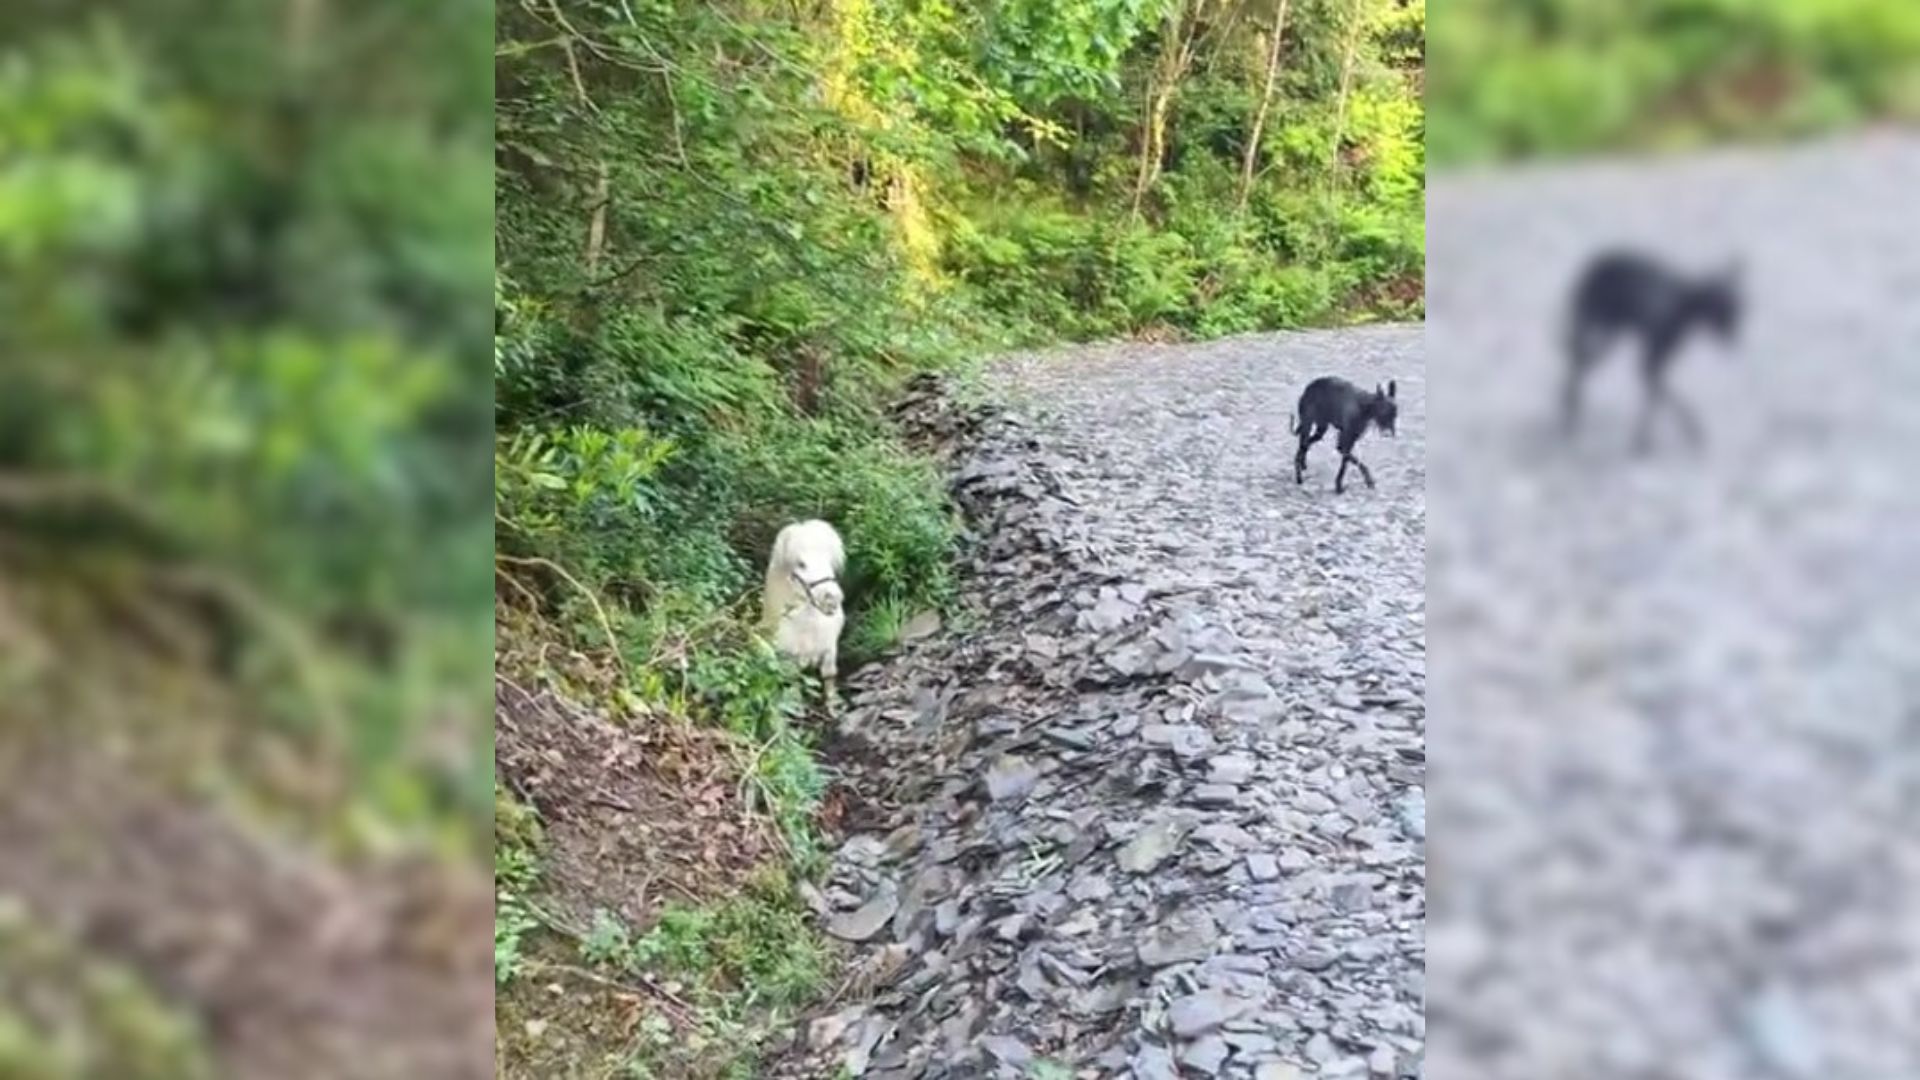 Woman Was Walking Her Dog When She Came Upon Tiny Fellow Staring At Her From A Ditch